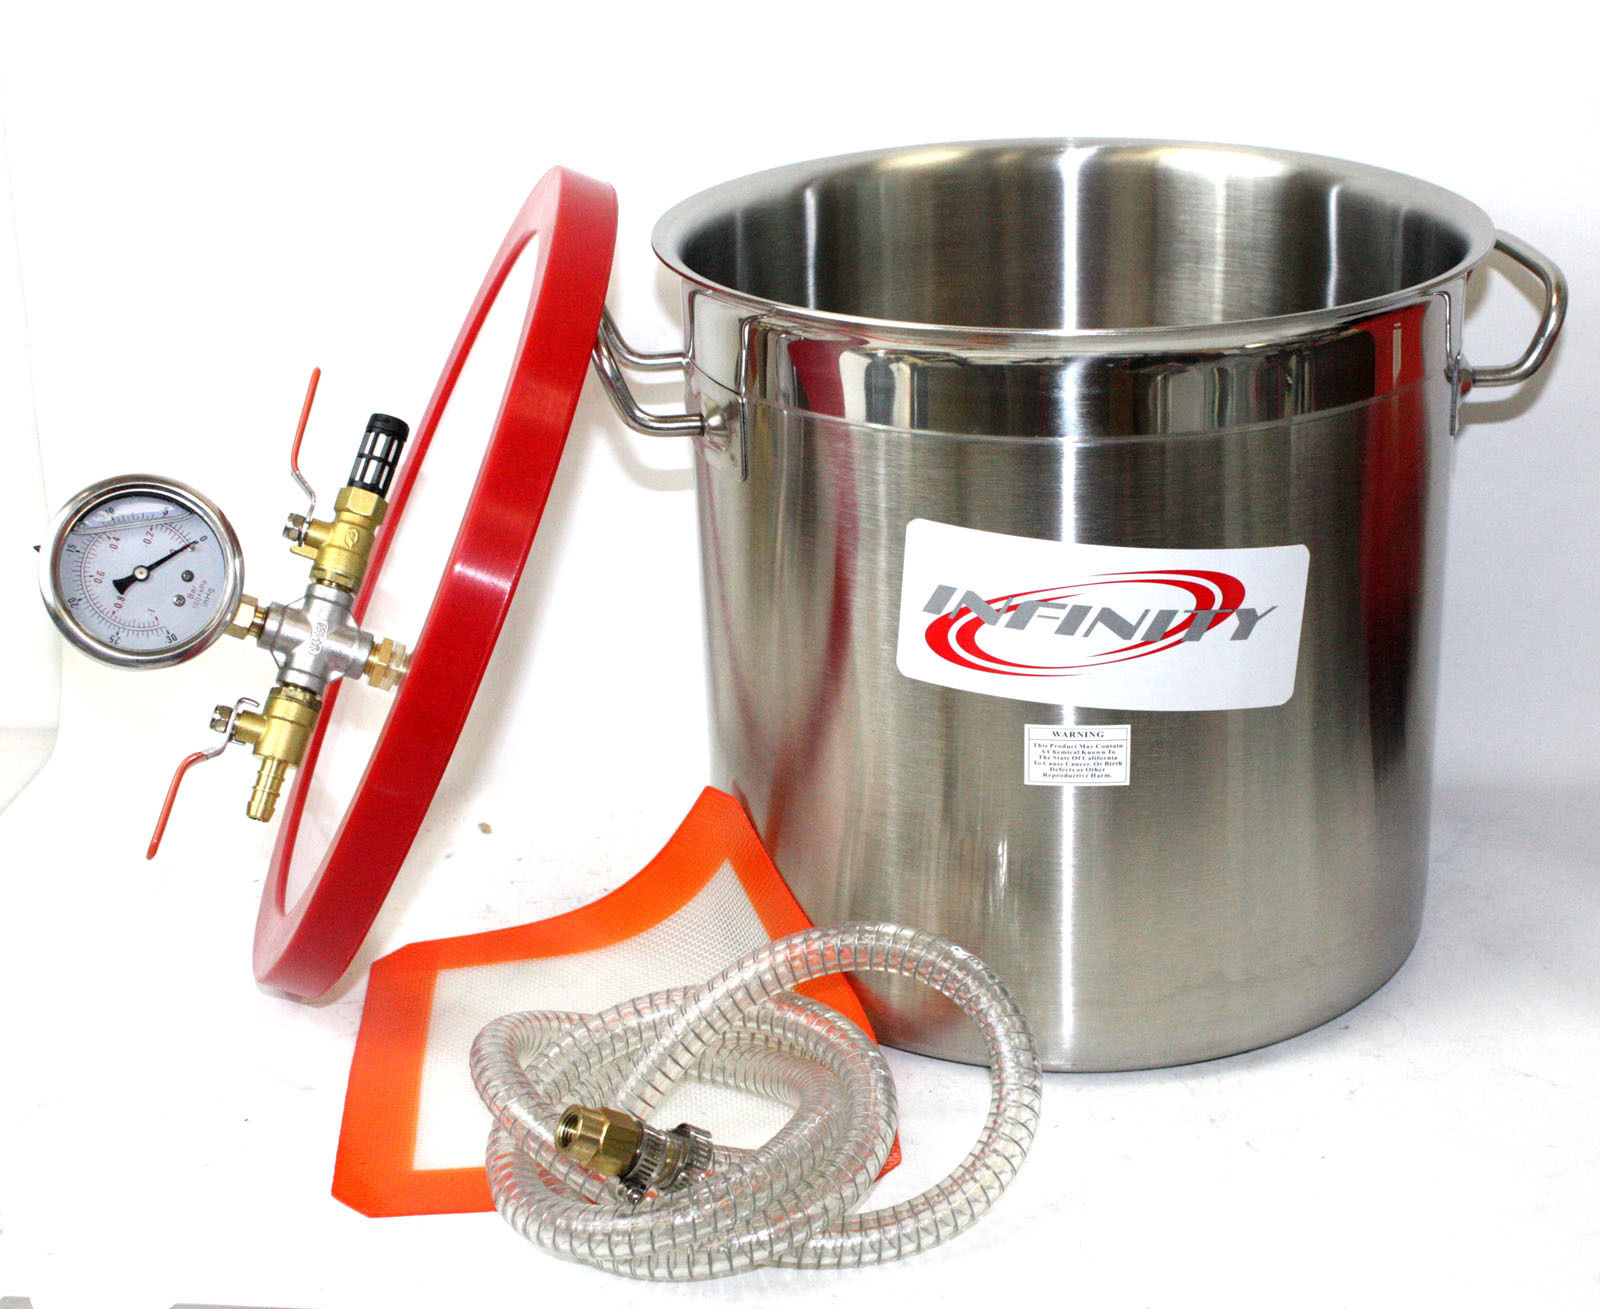 YAETEK 1.5 Gallon Stainless Steel Vacuum Chamber Silicone Kit for Degassing Resins Silicone and Epoxies 